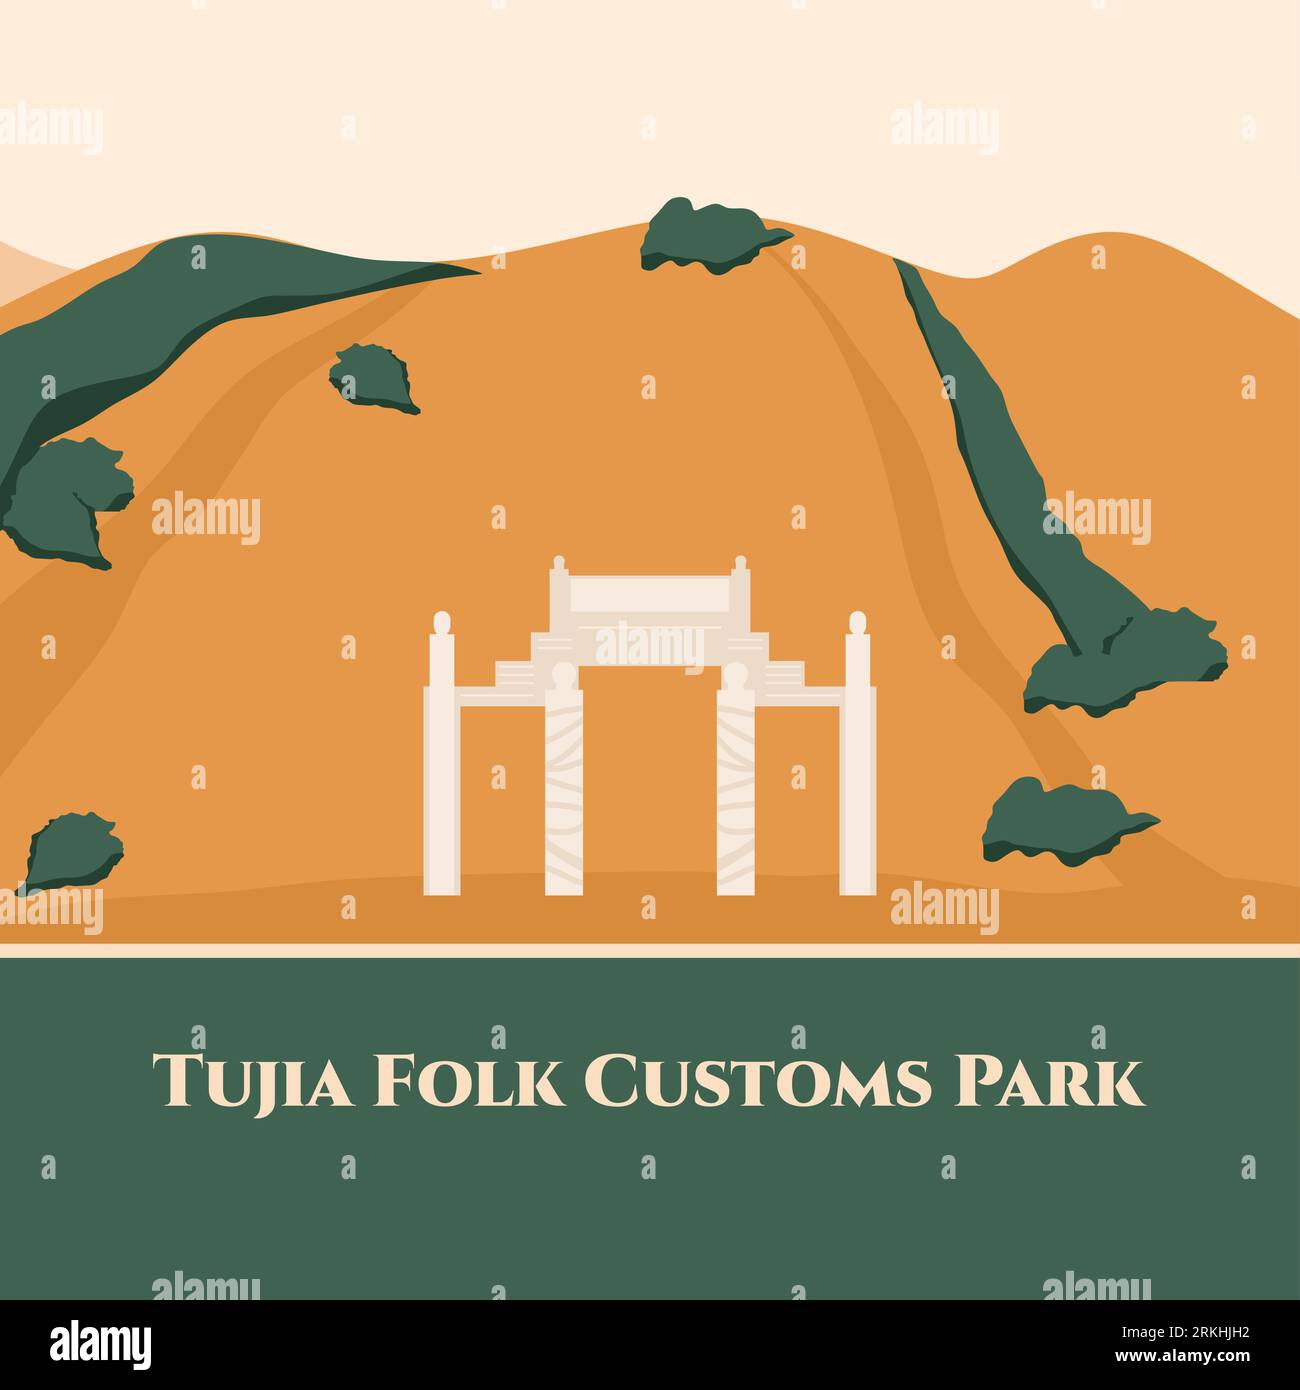 Tujia Folk Customs Park in Zhangjiajie Hunan, China. Cultural park with traditional Tujia architecture. Good for tourist destination with classical bu Stock Vector